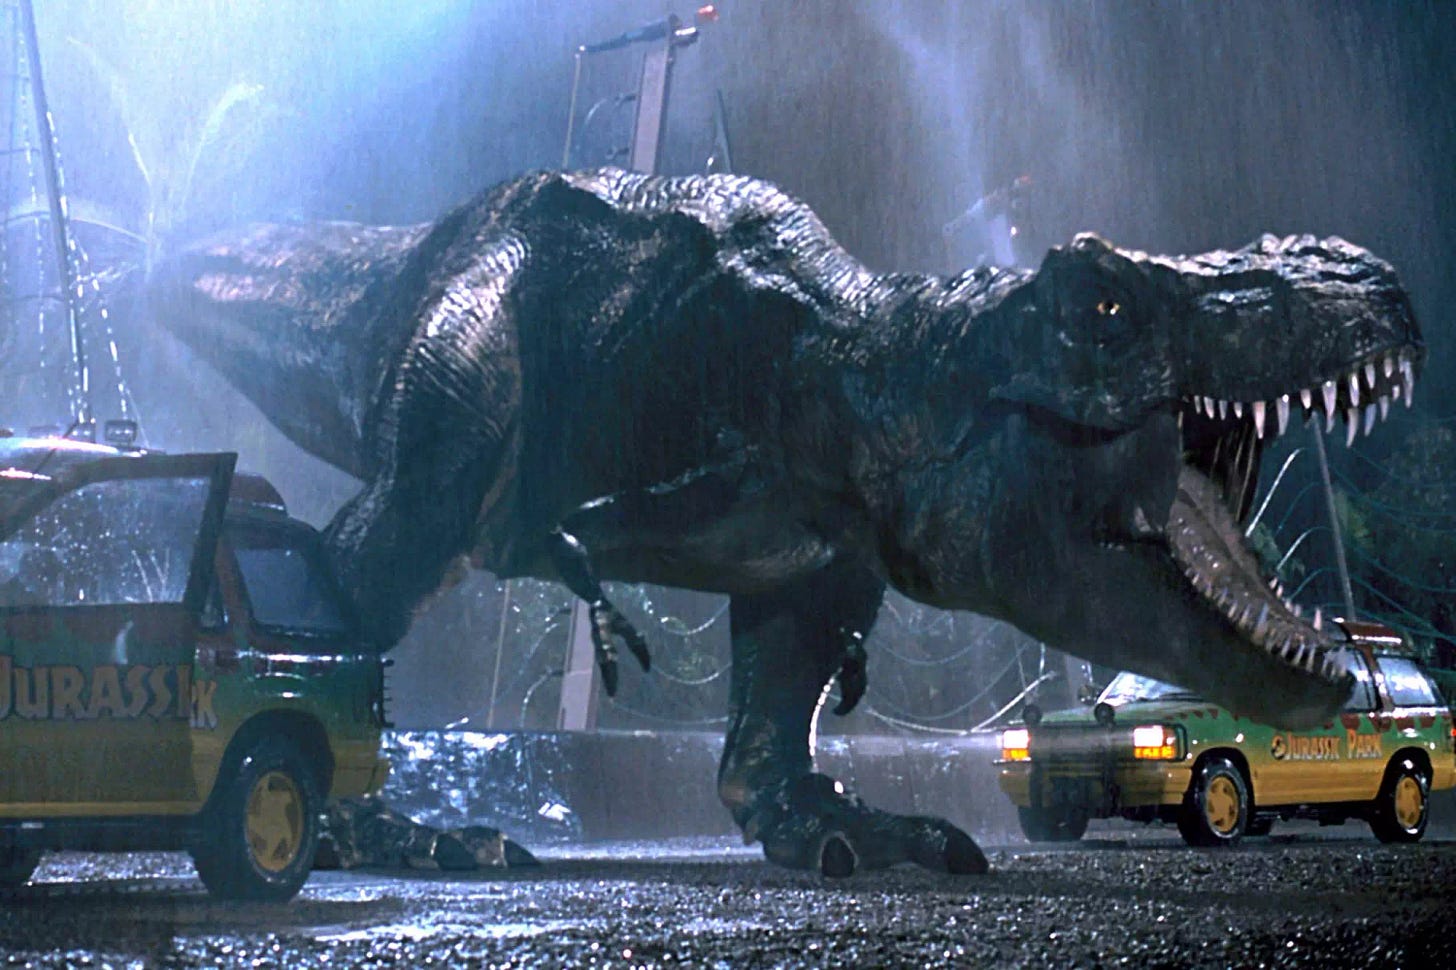 A T-Rex roars between two cars on a rainy night